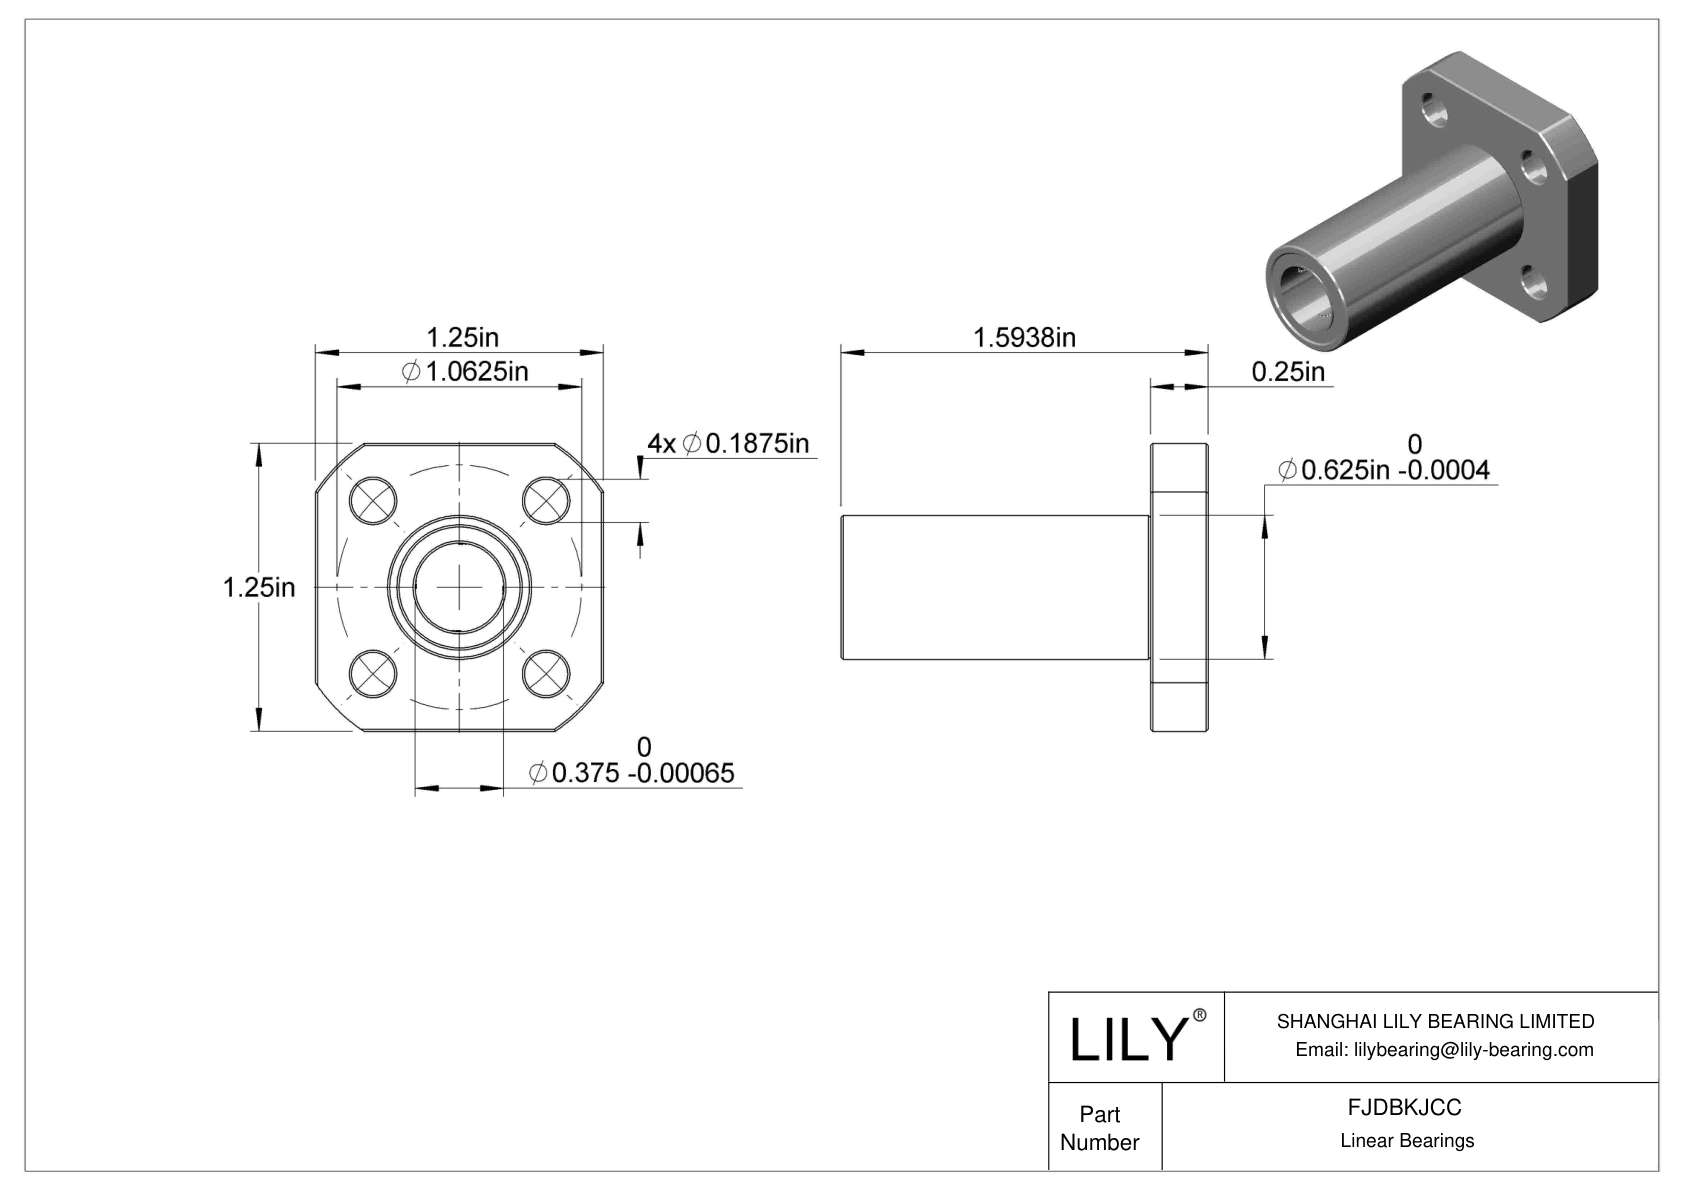 FJDBKJCC Corrosion-Resistant Flange-Mounted Linear Ball Bearings cad drawing